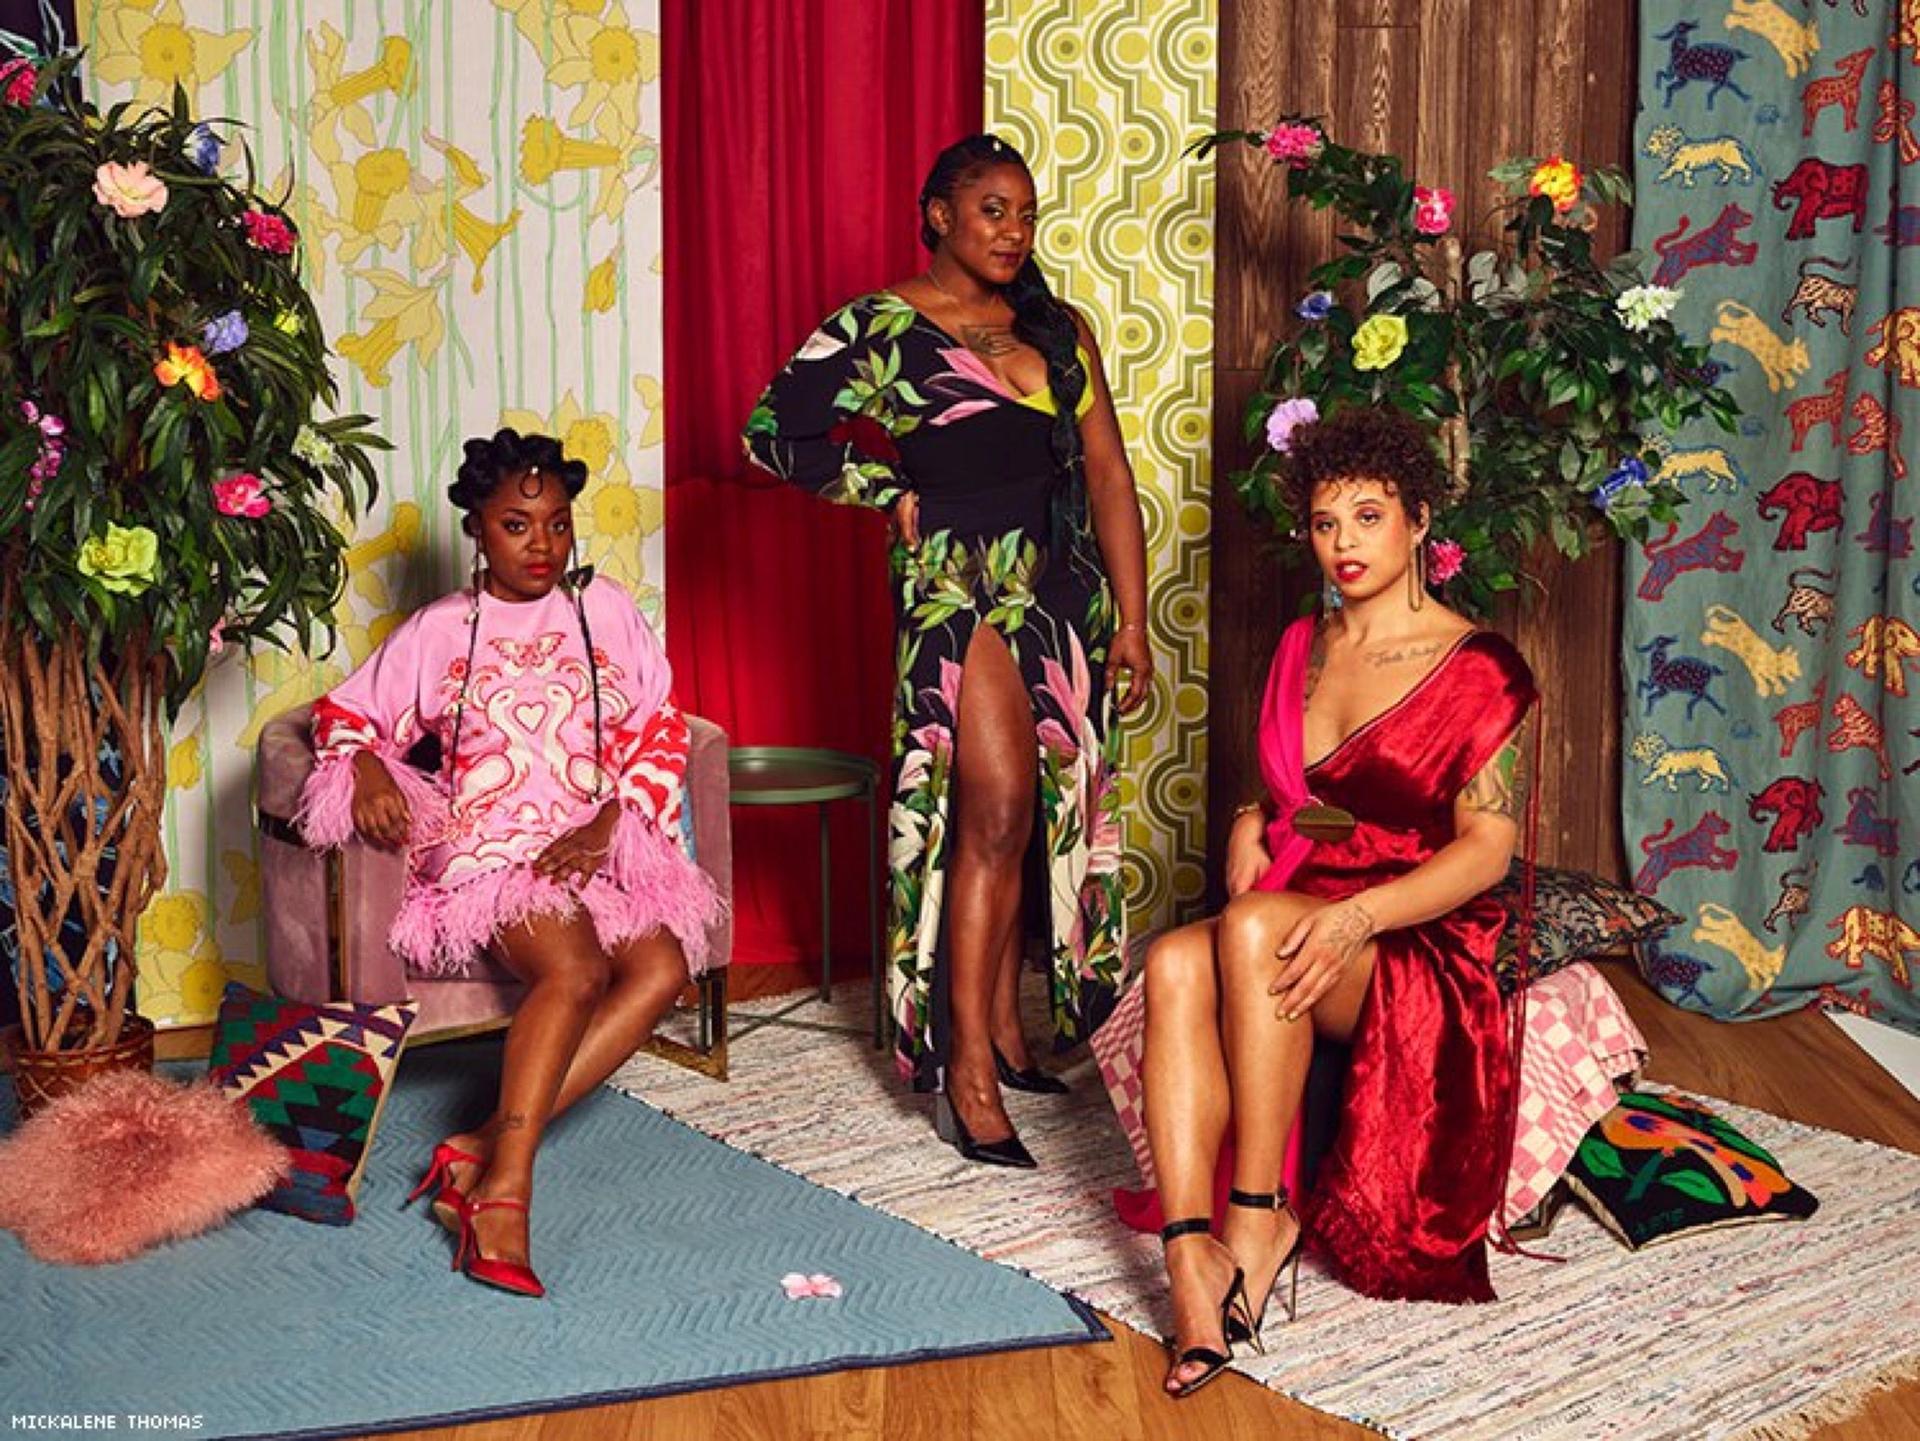 Mickalene Thomas for OUT (March 2019).